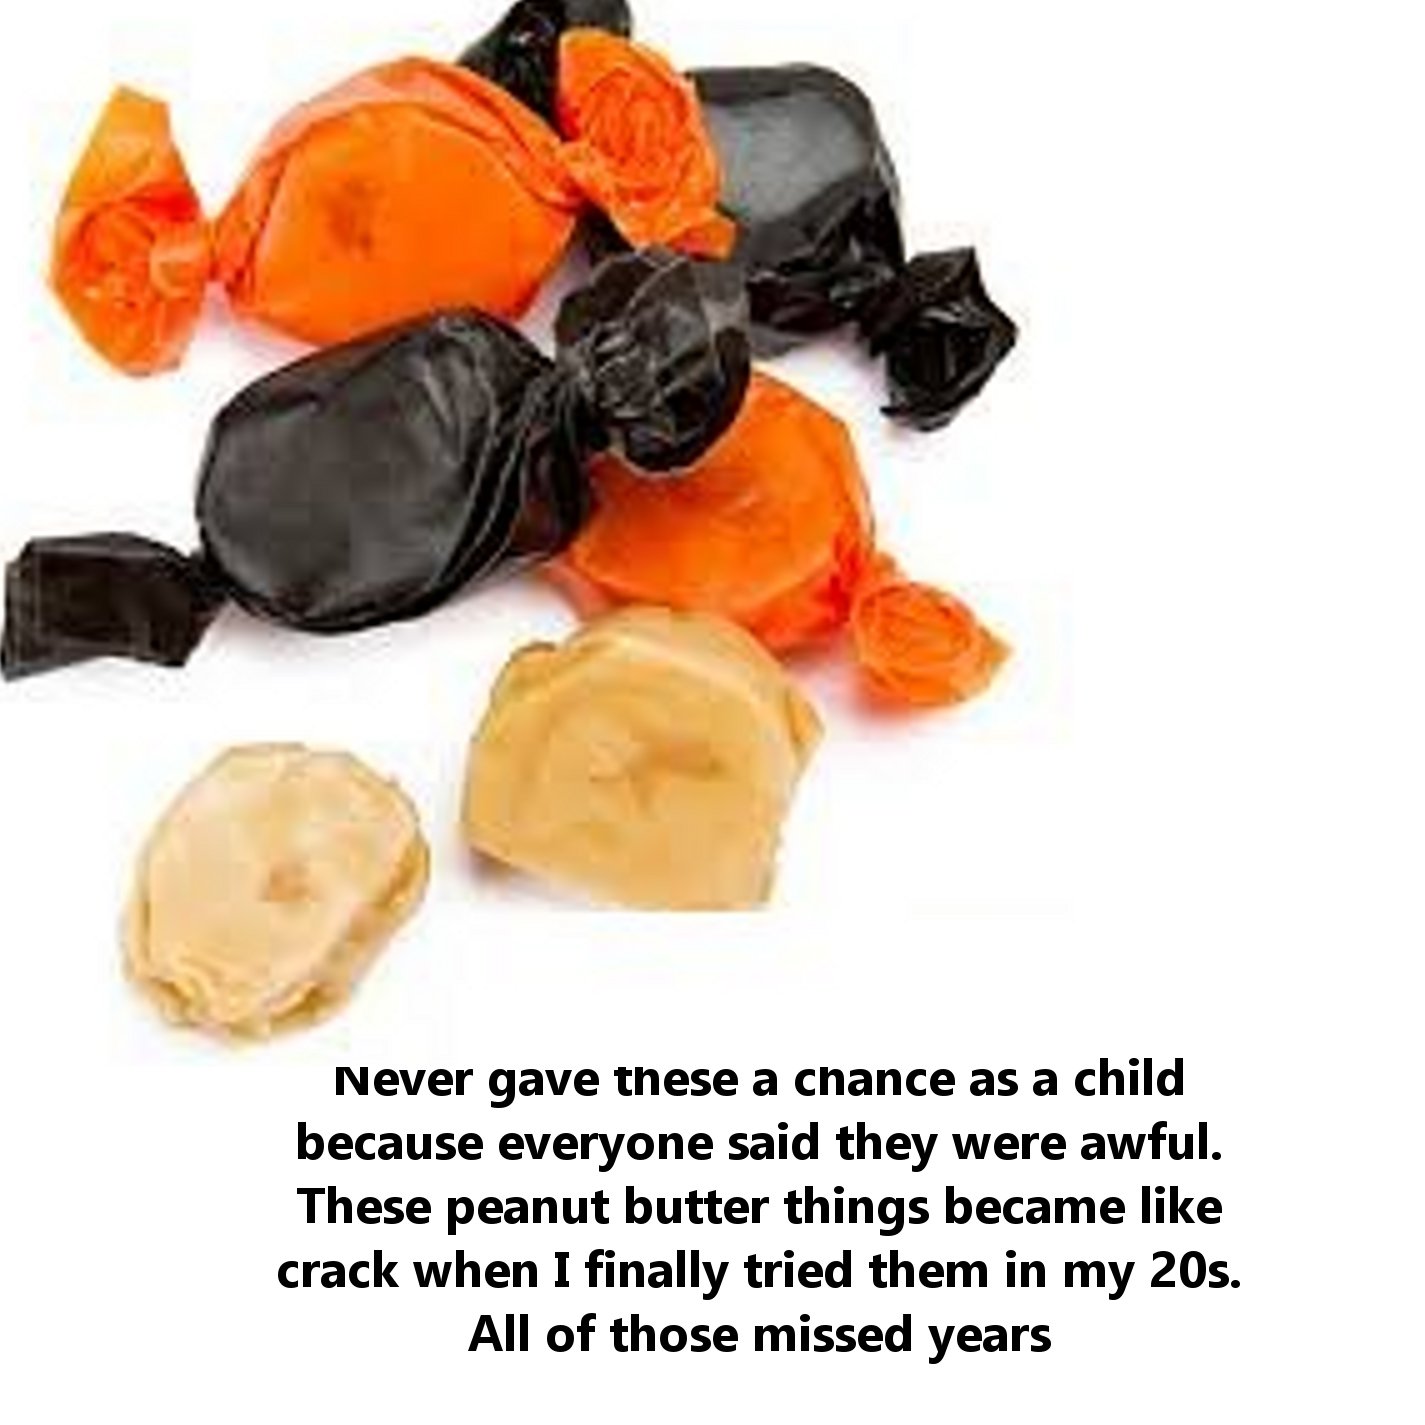 terrible halloween candy - Never gave these a chance as a child because everyone said they were awful. These peanut butter things became crack when I finally tried them in my 20s. . All of those missed years